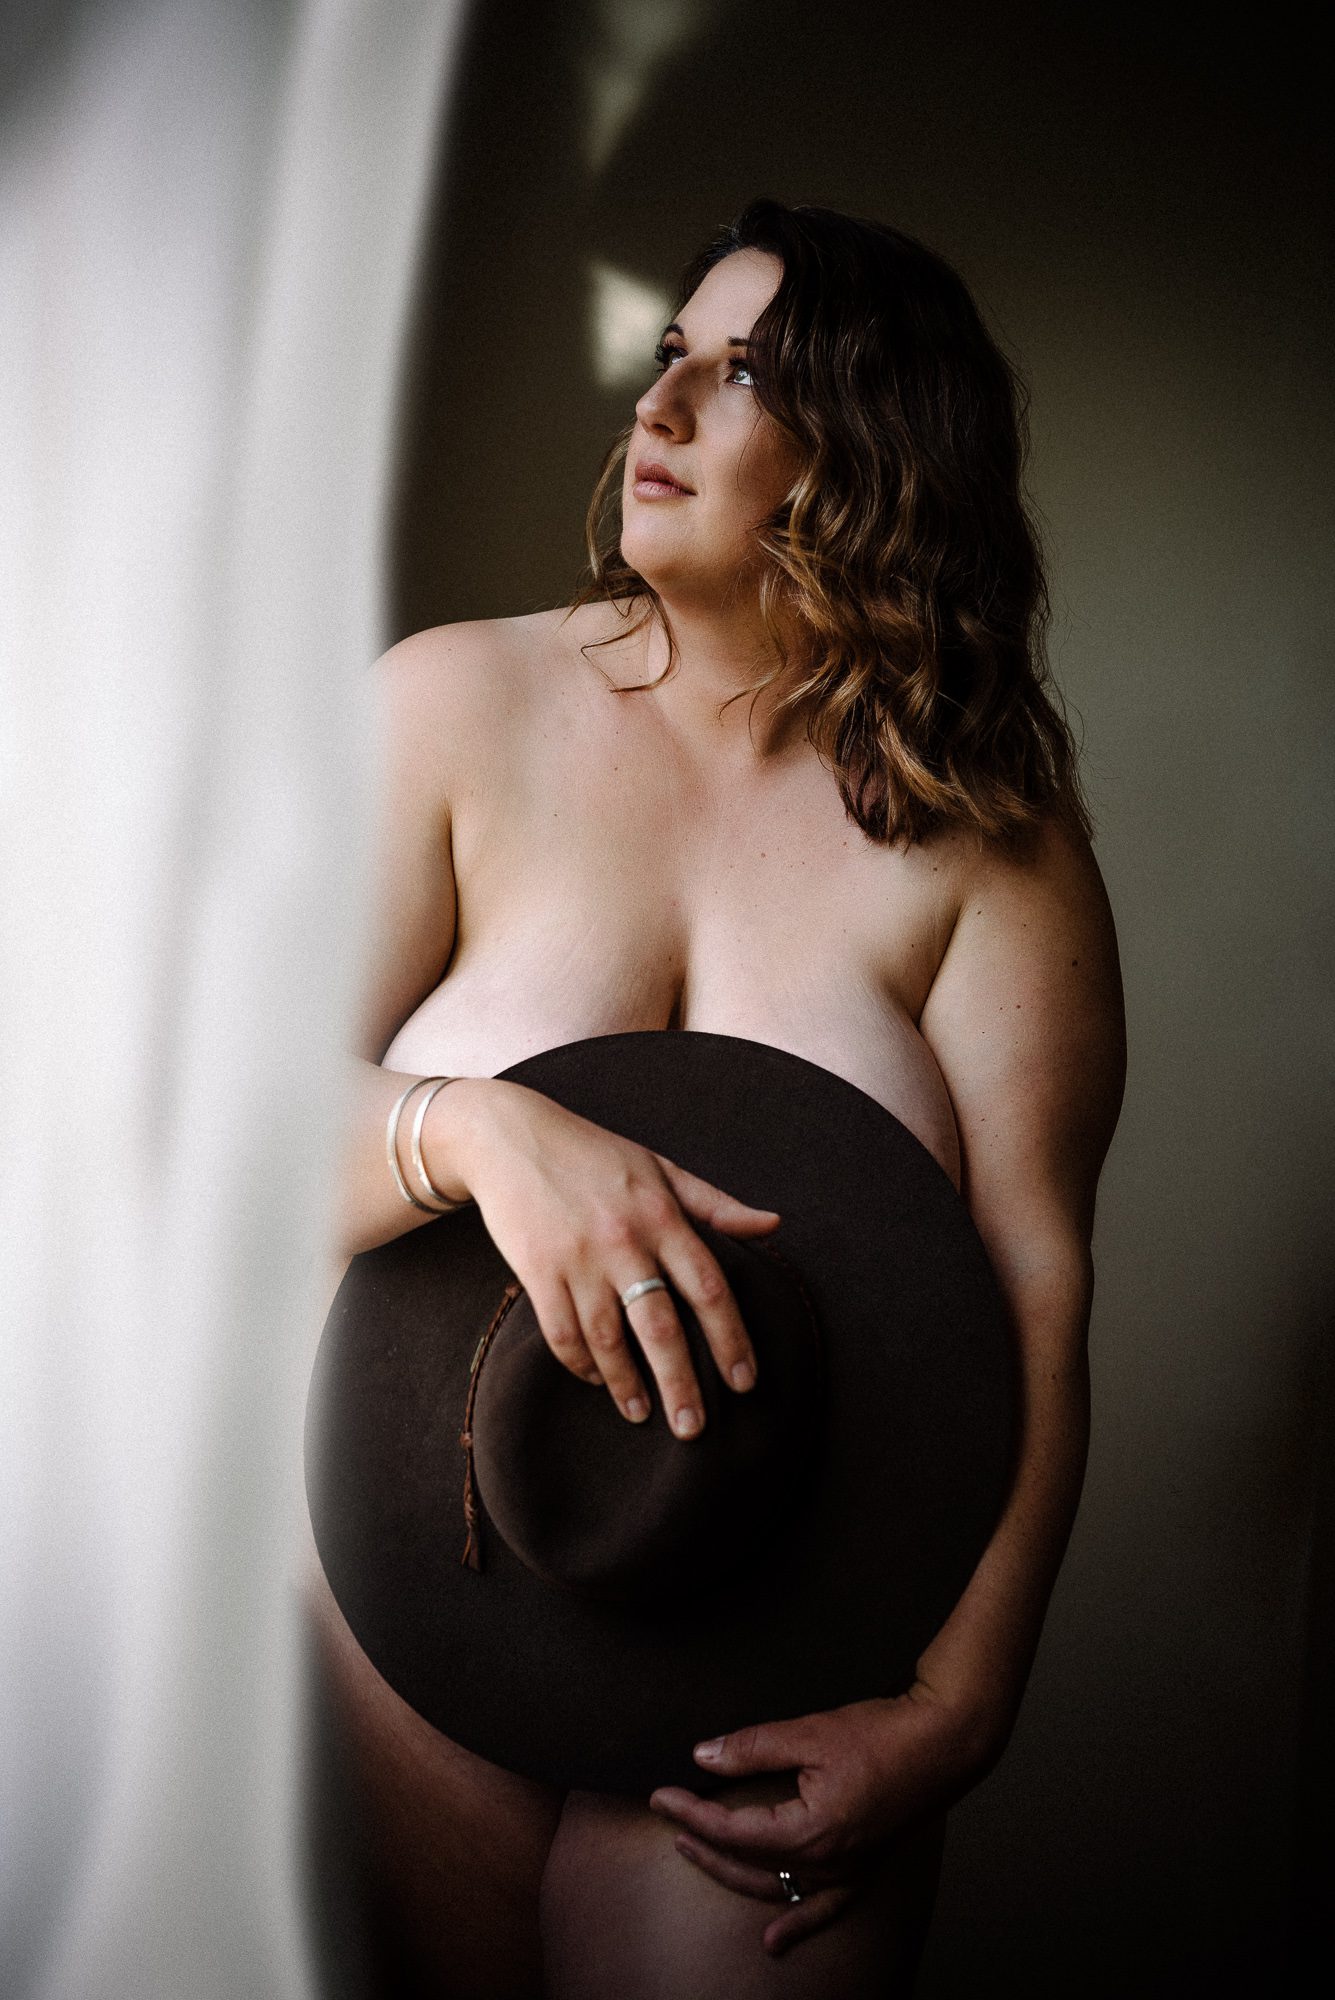 A photograph on a woman holding a cowboy hat in front of her, obscuring her nudity.